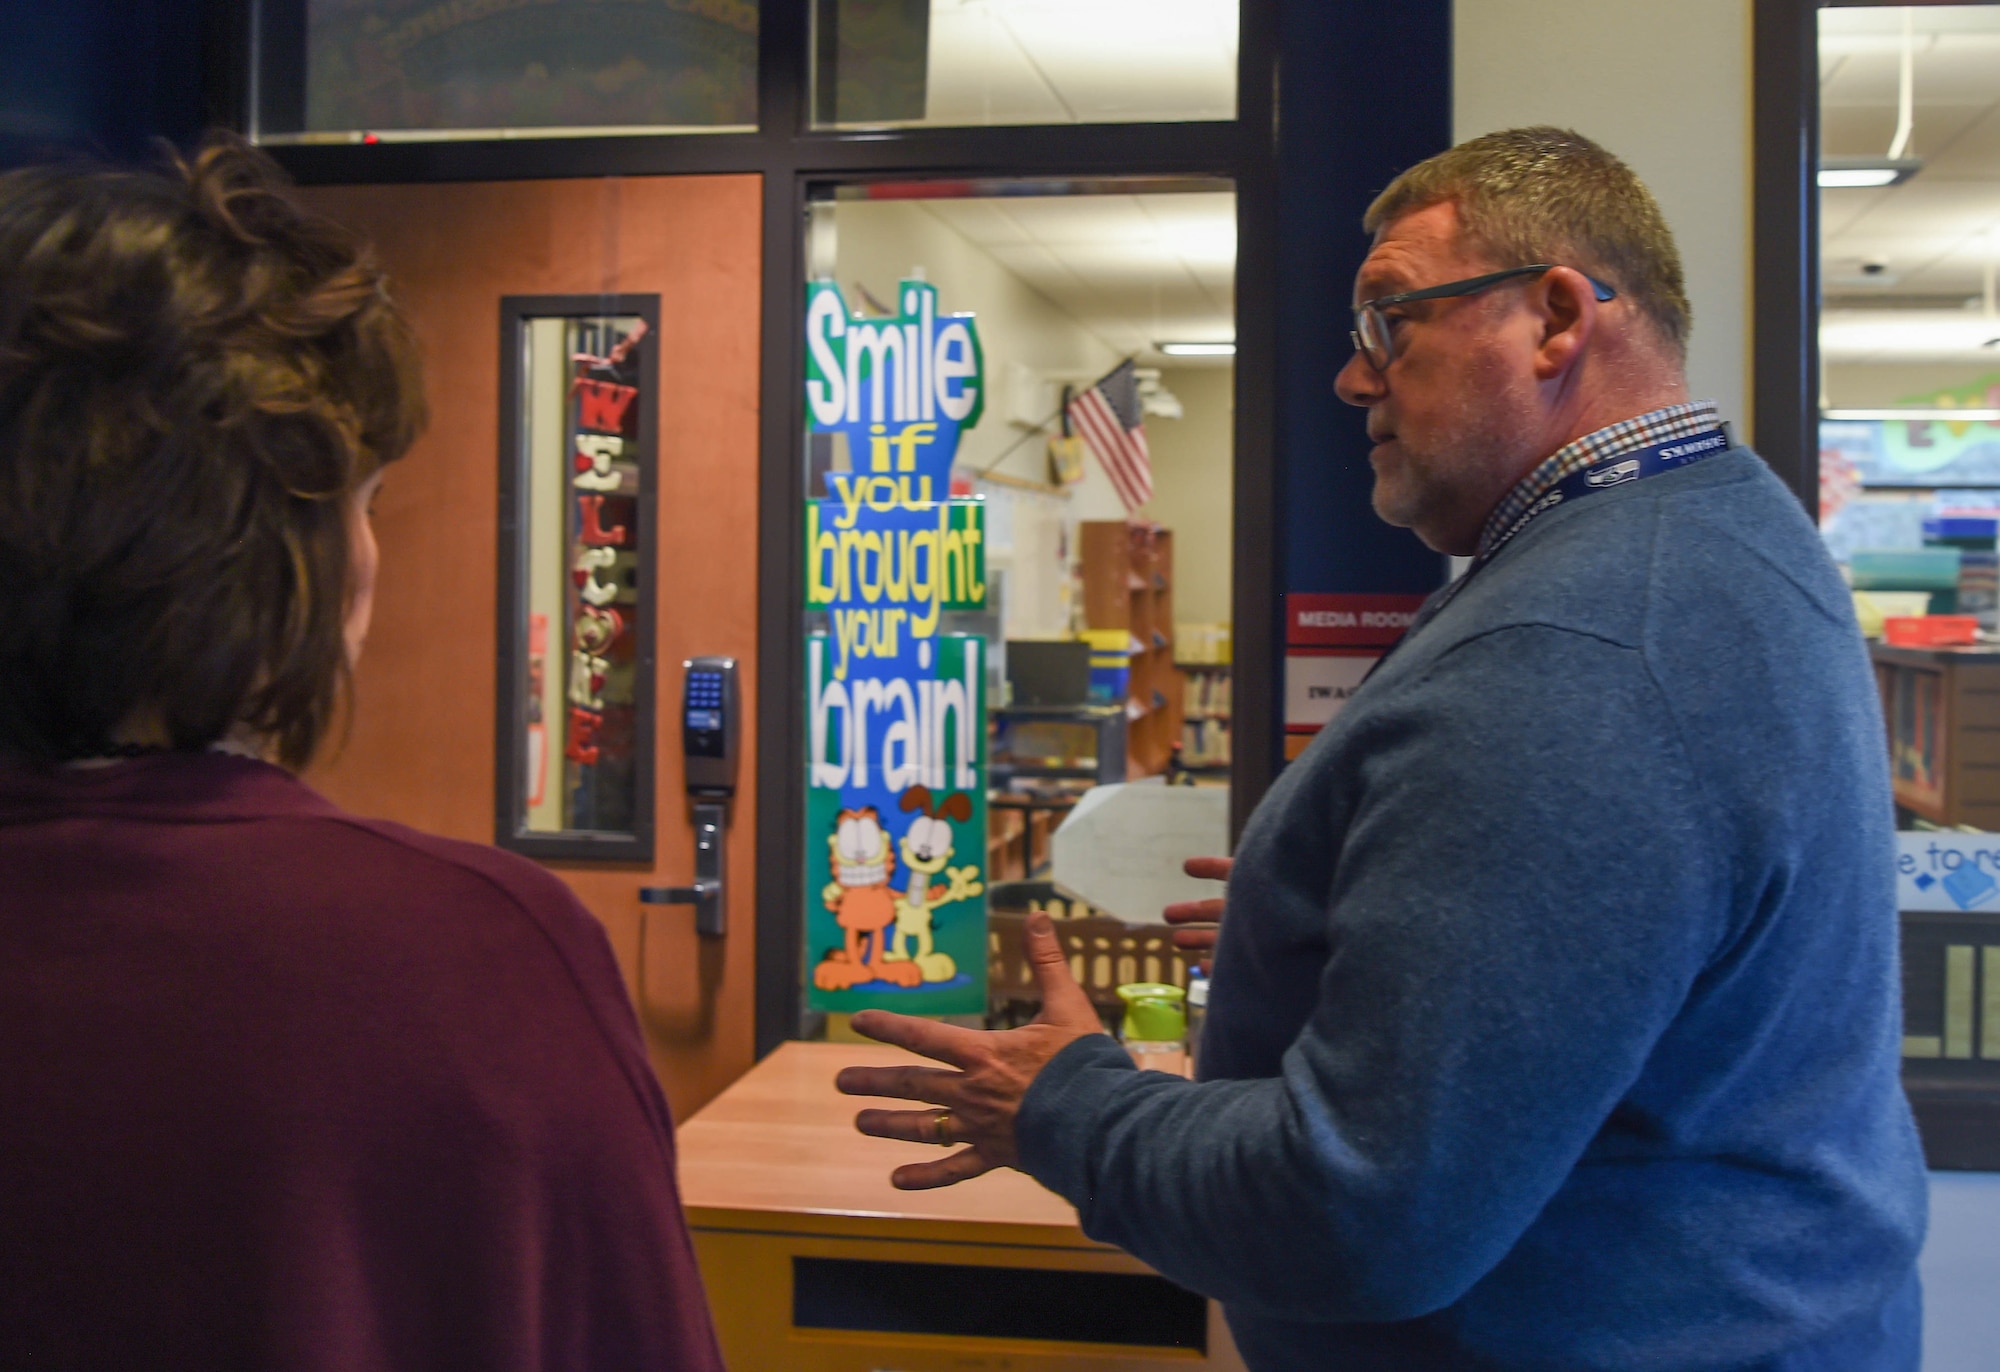 Jeff Murrell, Carter Lake Elementary principal, shares the resources and programs the school’s library offers students during a tour of Joint Base Lewis-McChord (JBLM), Wash., Feb. 20, 2019. This visit to JBLM’s on-base elementary school at McChord Field was one of the points of interest for Kelly Barrett, wife of Maj. Gen. Sam Barrett, 18th Air Force commander. It can sometimes be a challenge for the children of military families to receive a solid education when they have to move so often. (U.S. Air Force photo by Senior Airman Tryphena Mayhugh)